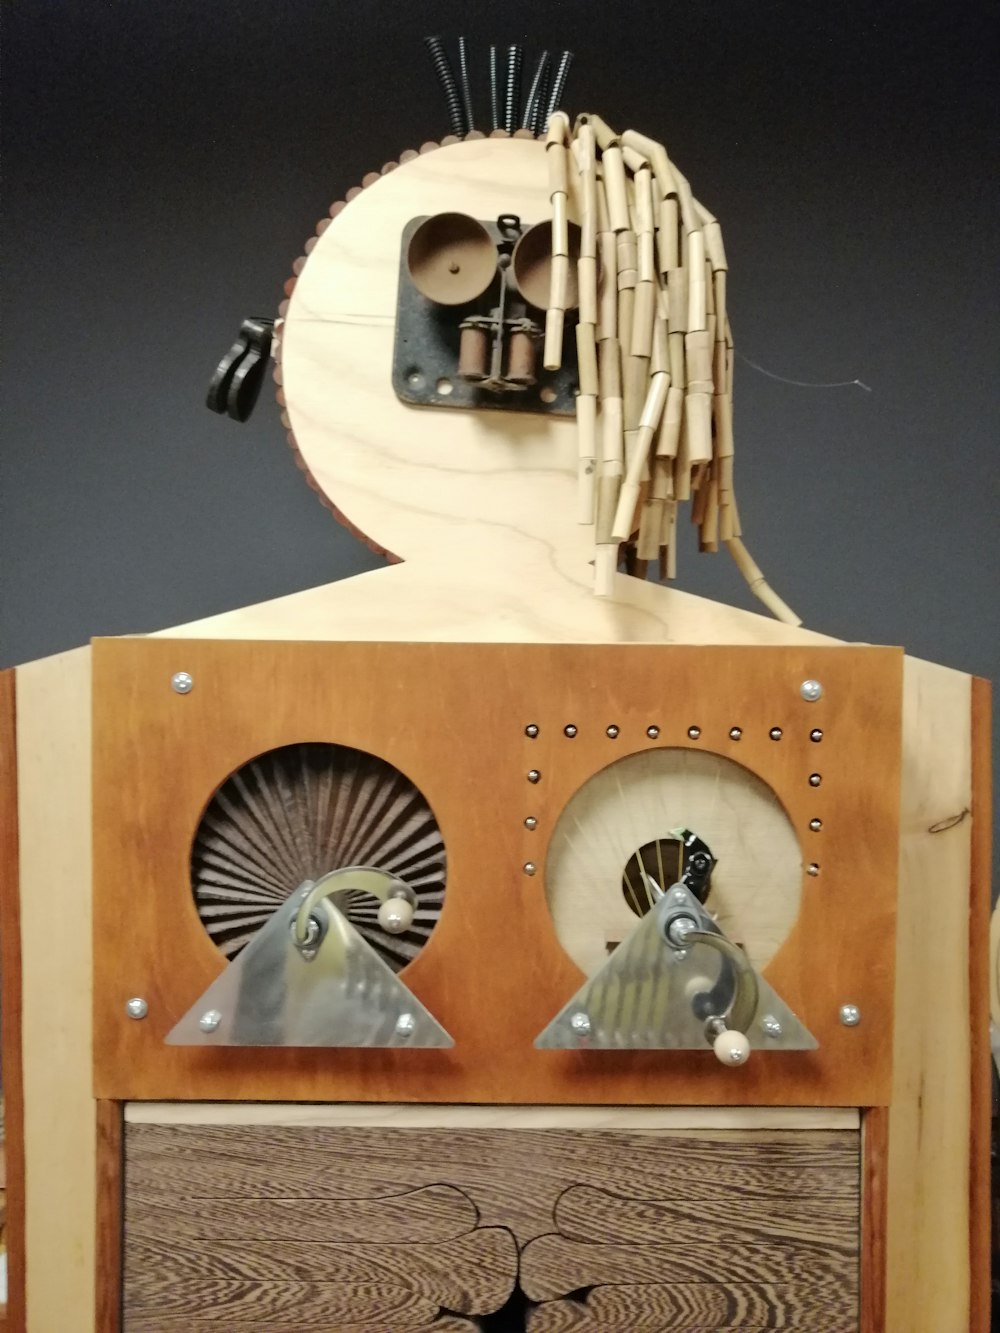 a wooden clock with a face made out of wood